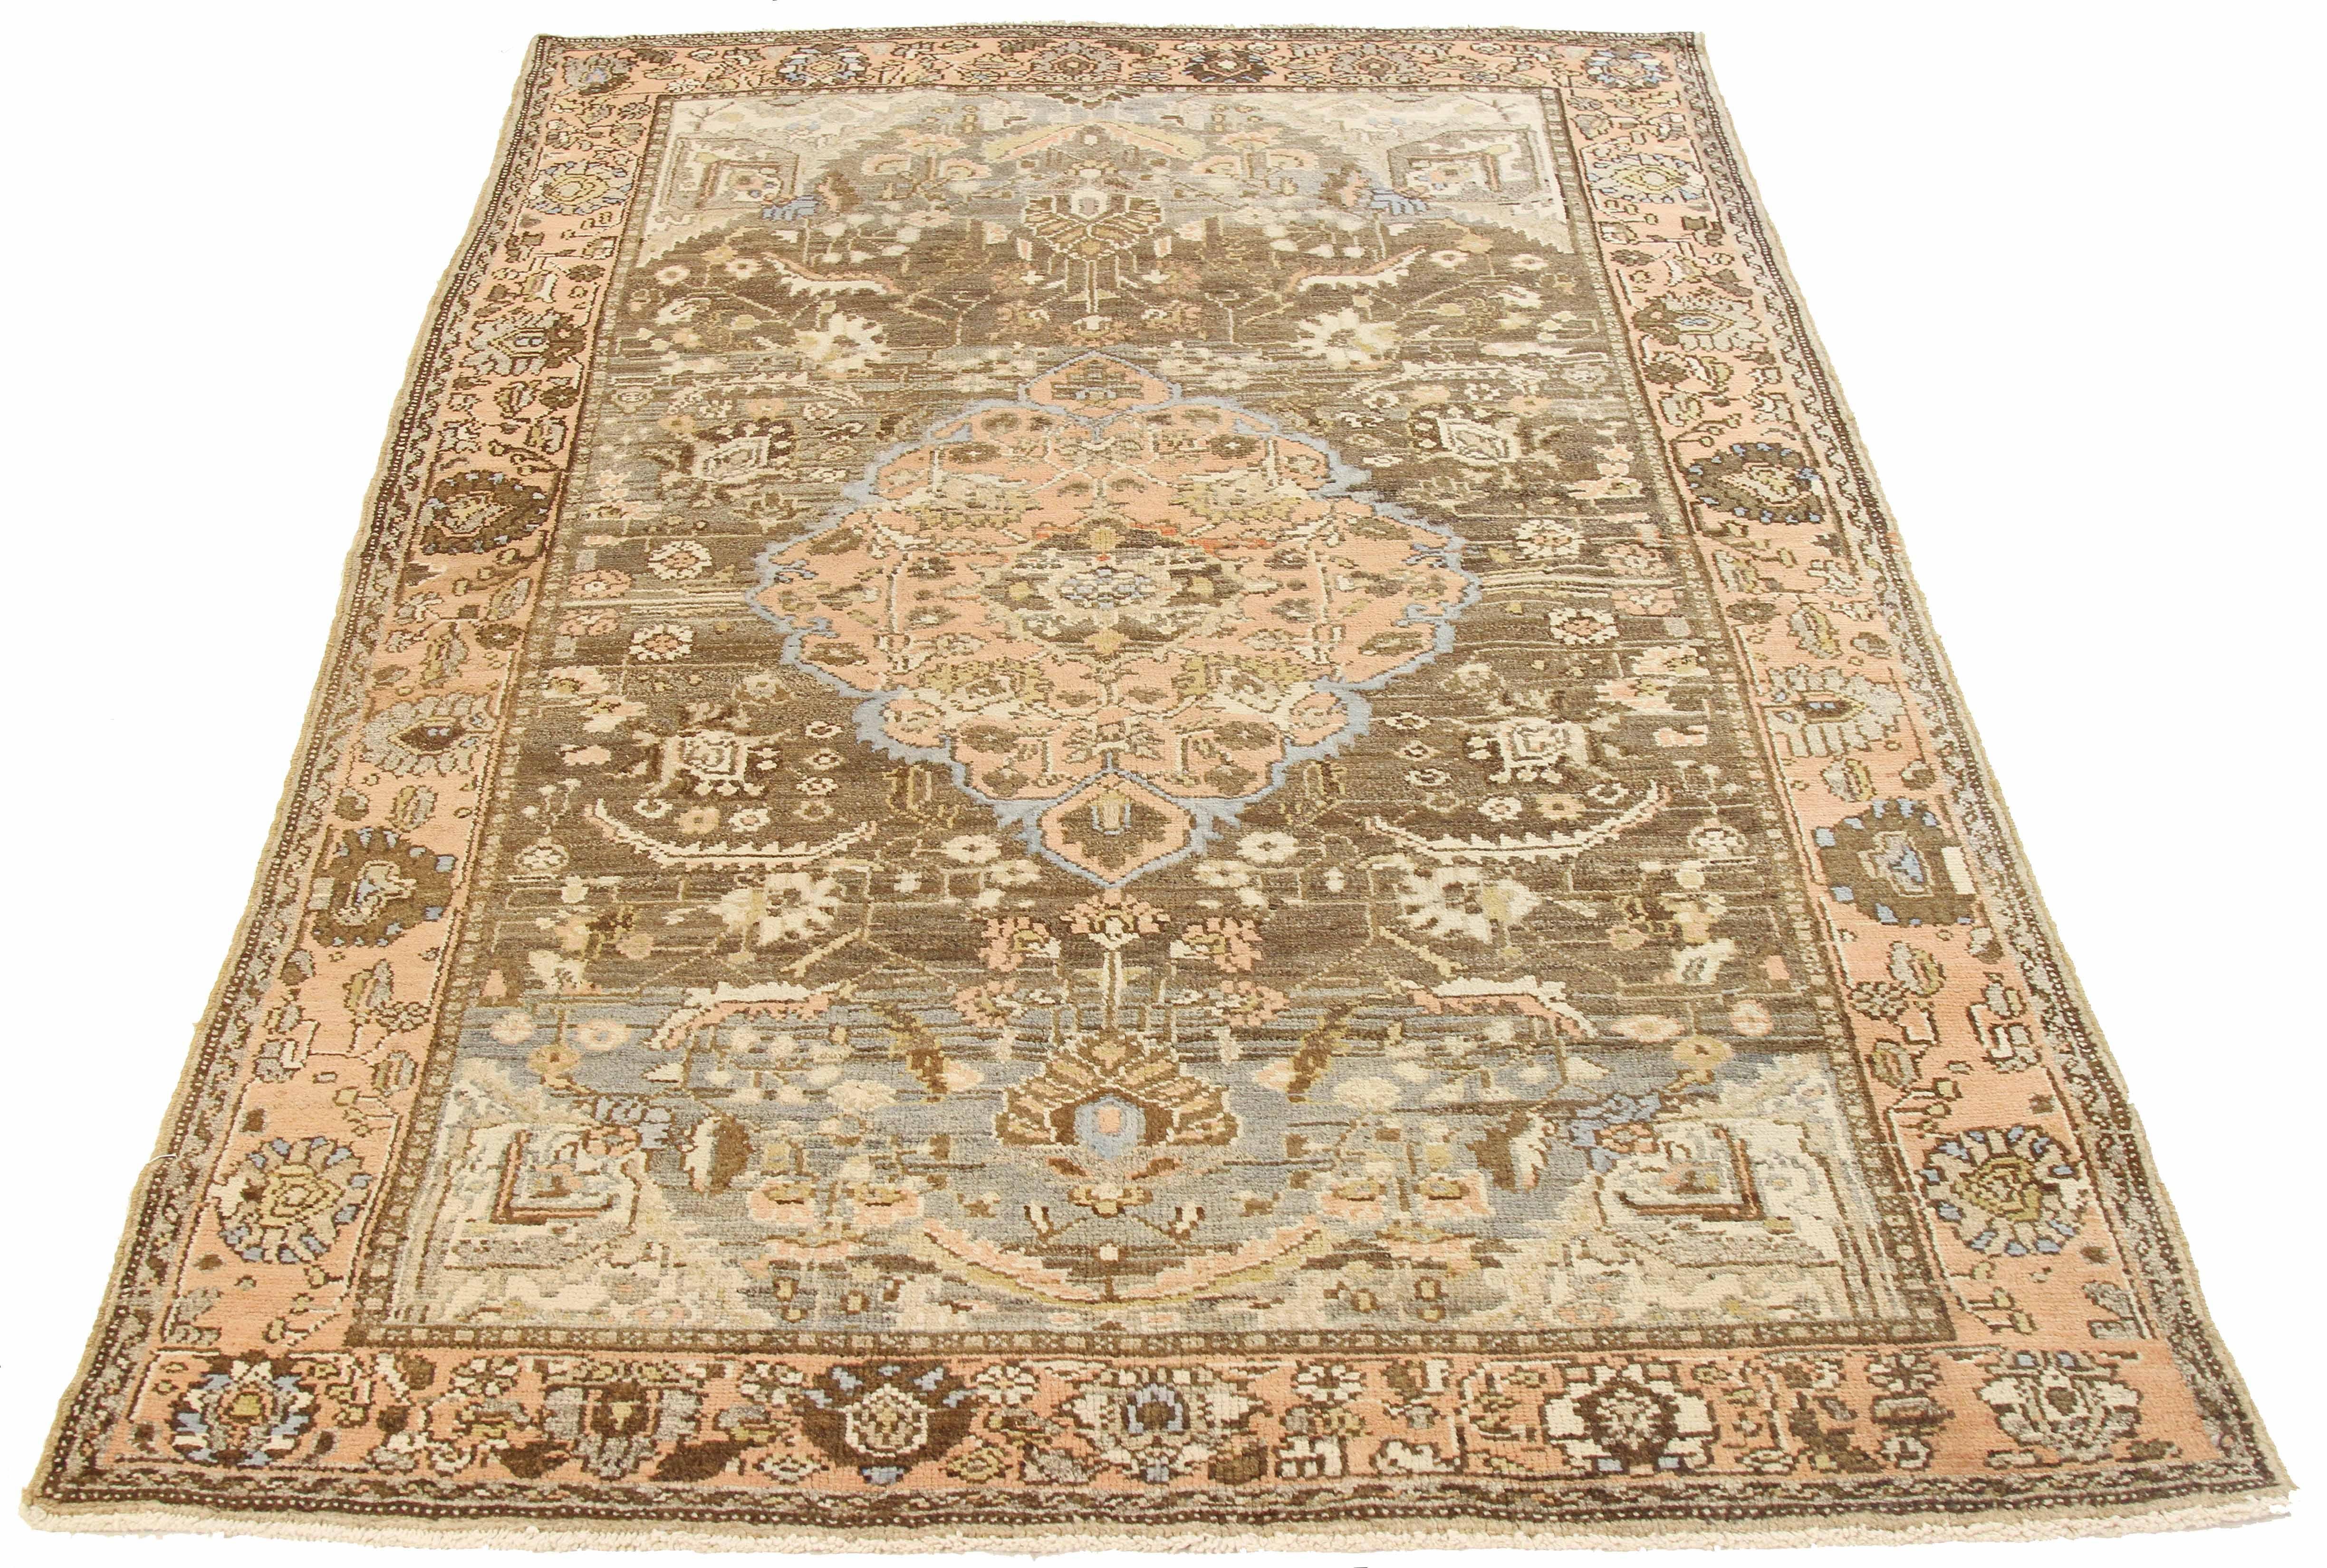 Antique Persian rug handwoven from the finest sheep’s wool and colored with all-natural vegetable dyes that are safe for humans and pets. It’s a traditional Khamseh design featuring a gorgeous brown and pink botanical field. It’s a stunning piece to